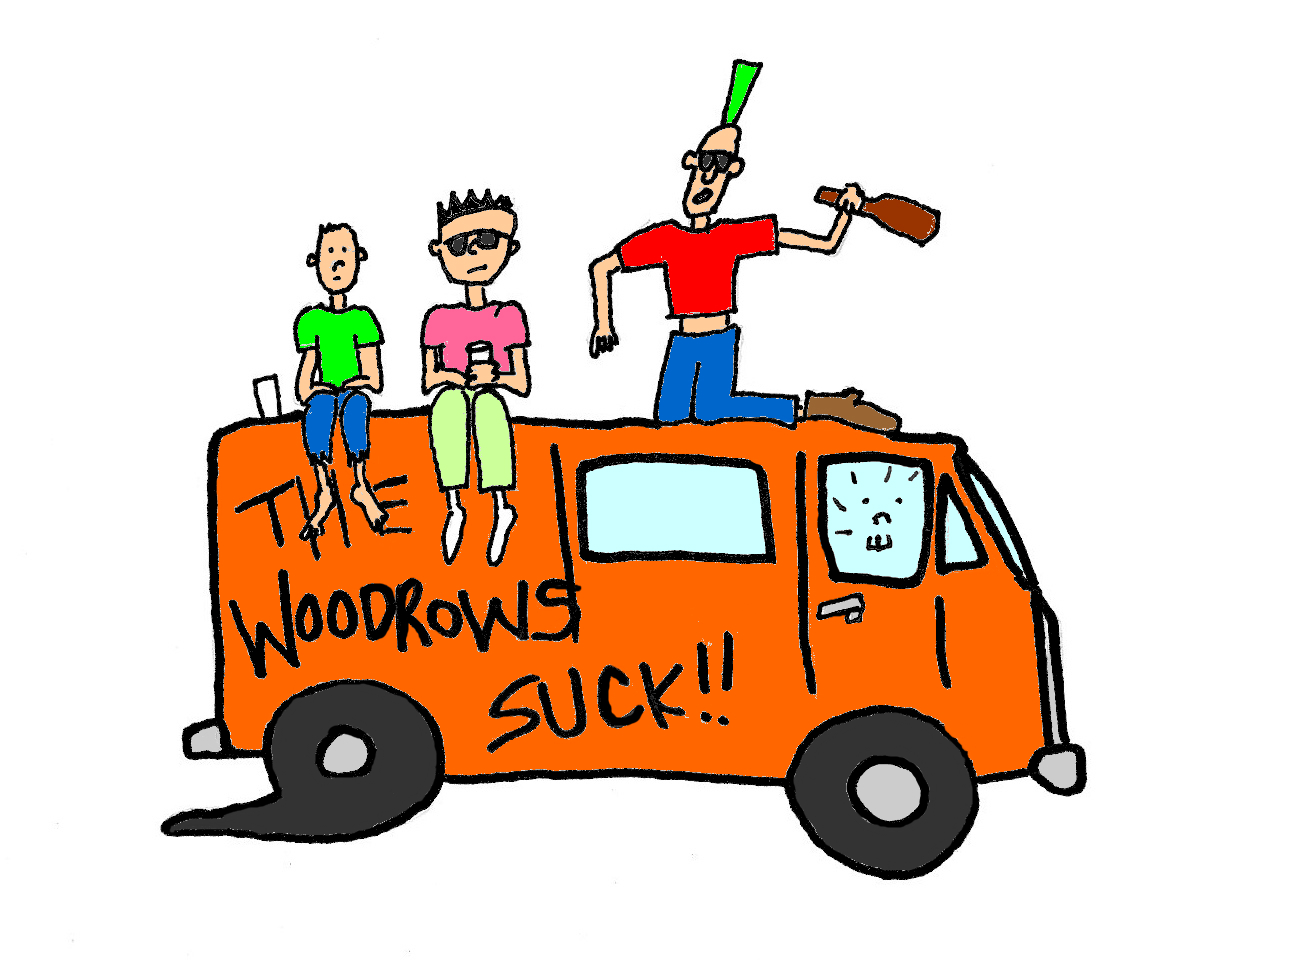 The Woodrows Suck!